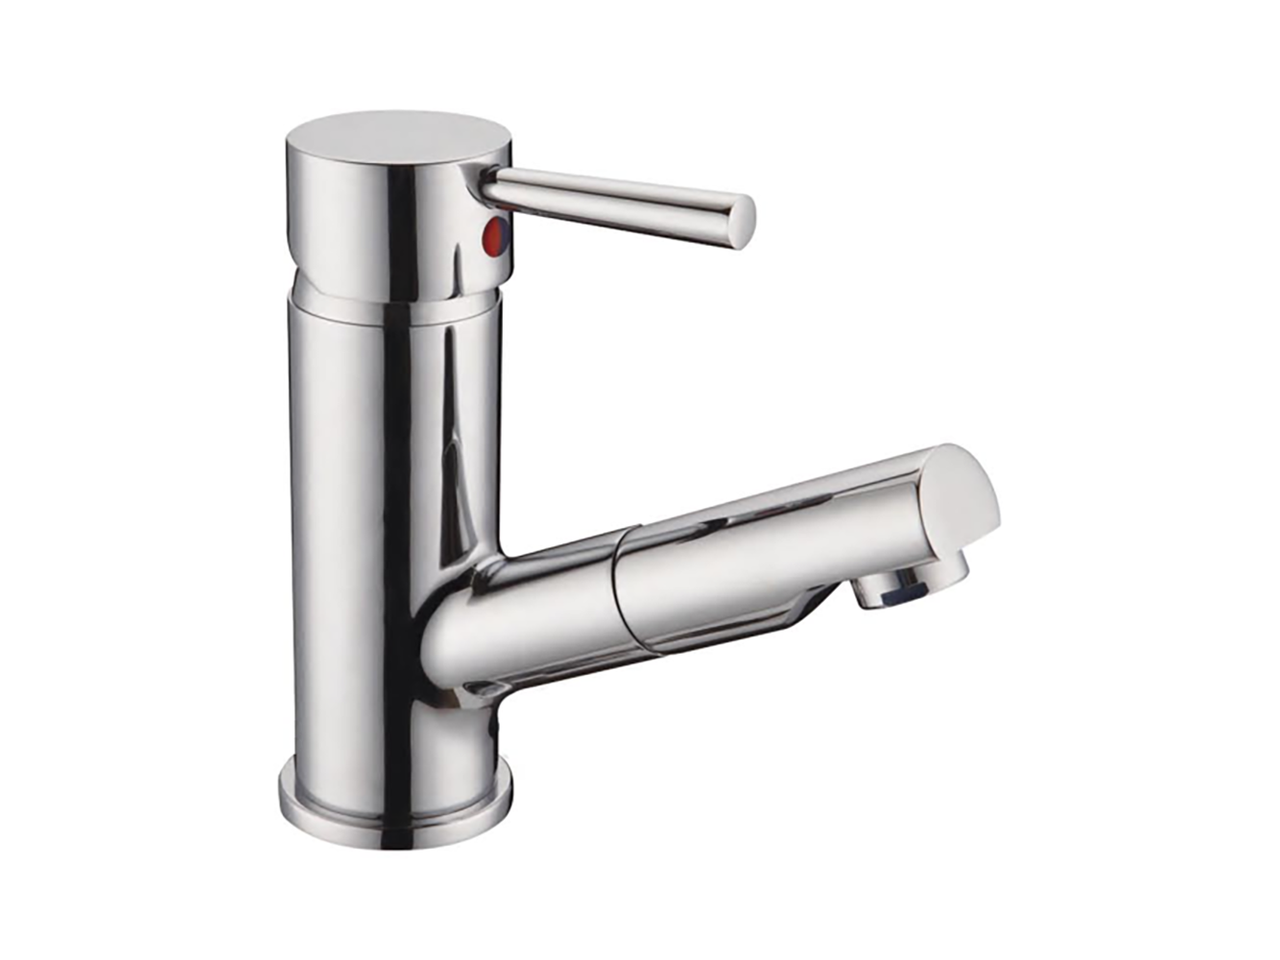 S.L. washbasin mixer with pull-out handspray TRATTO EVO - v1